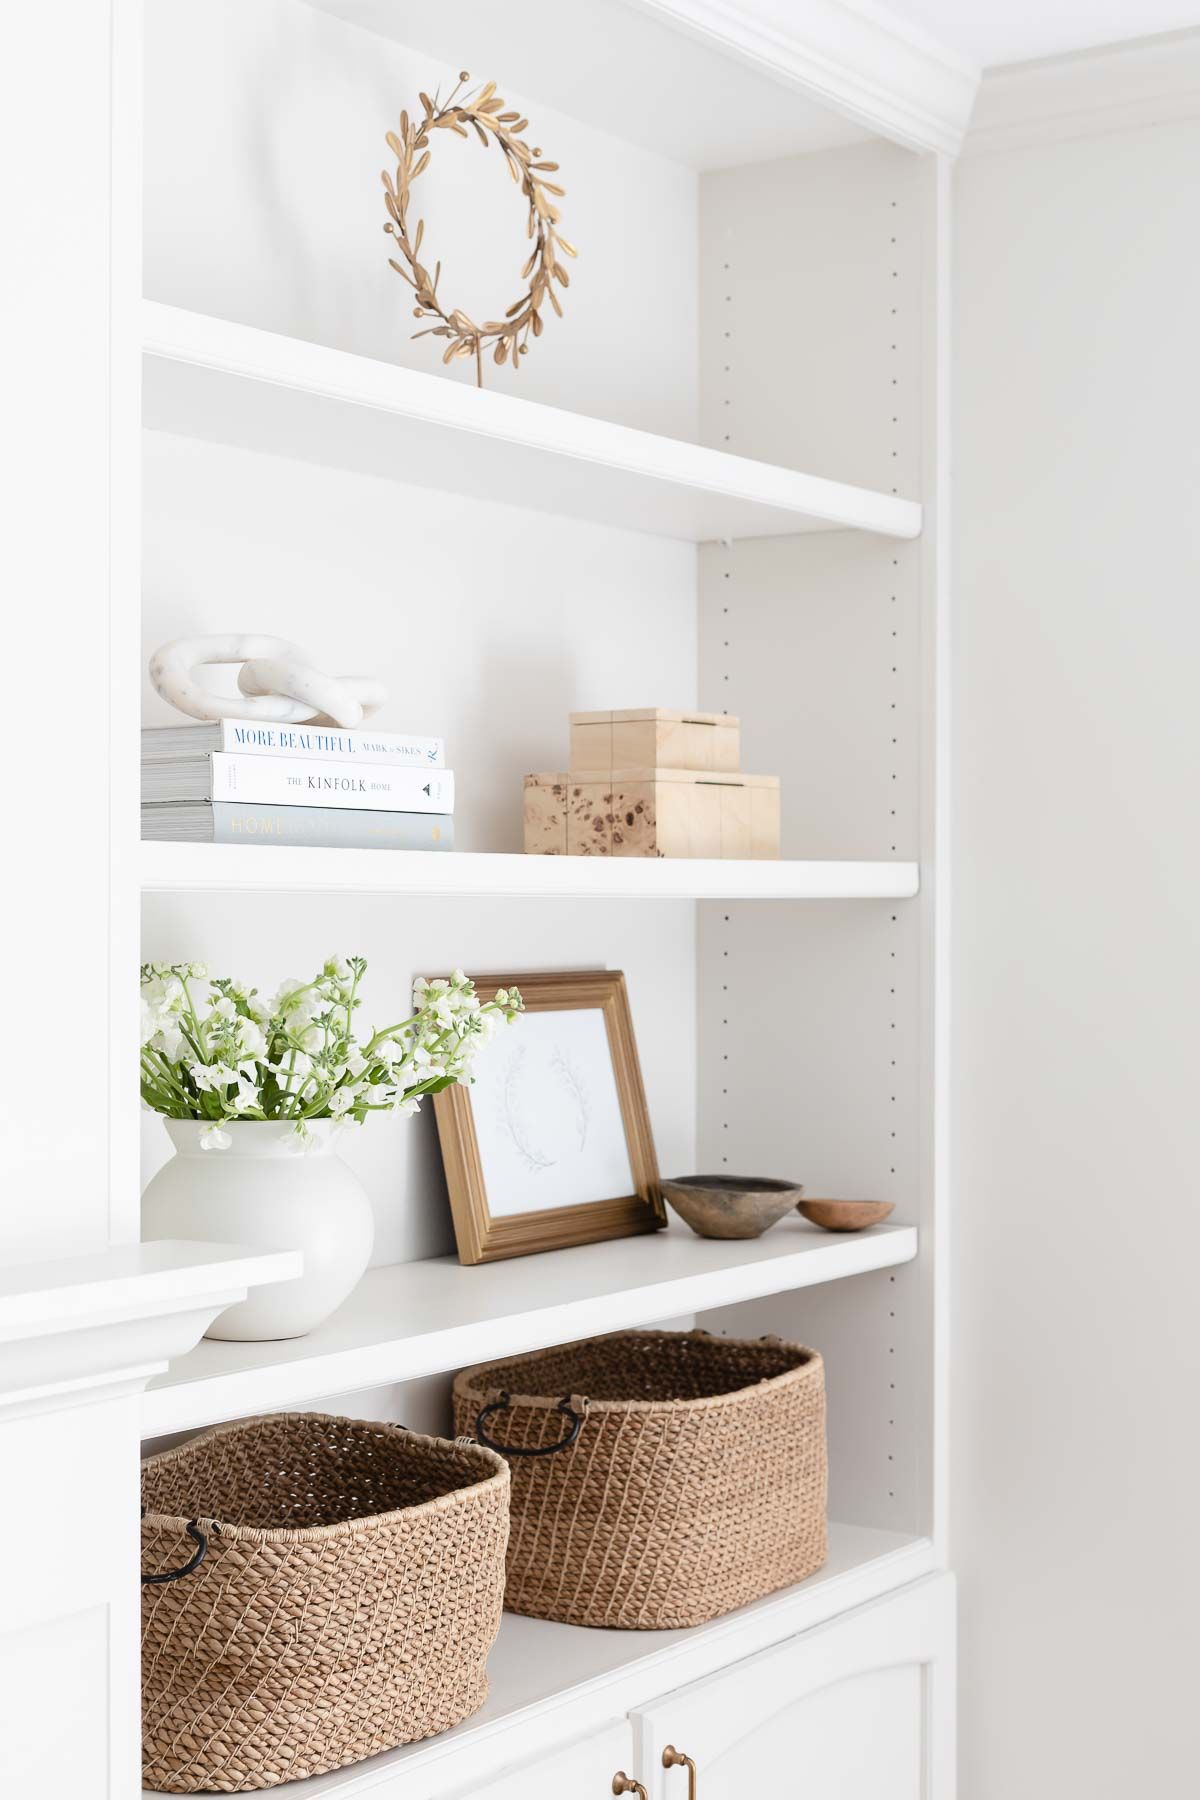 Built in bookshelves styled with neutral decor and home accessories.